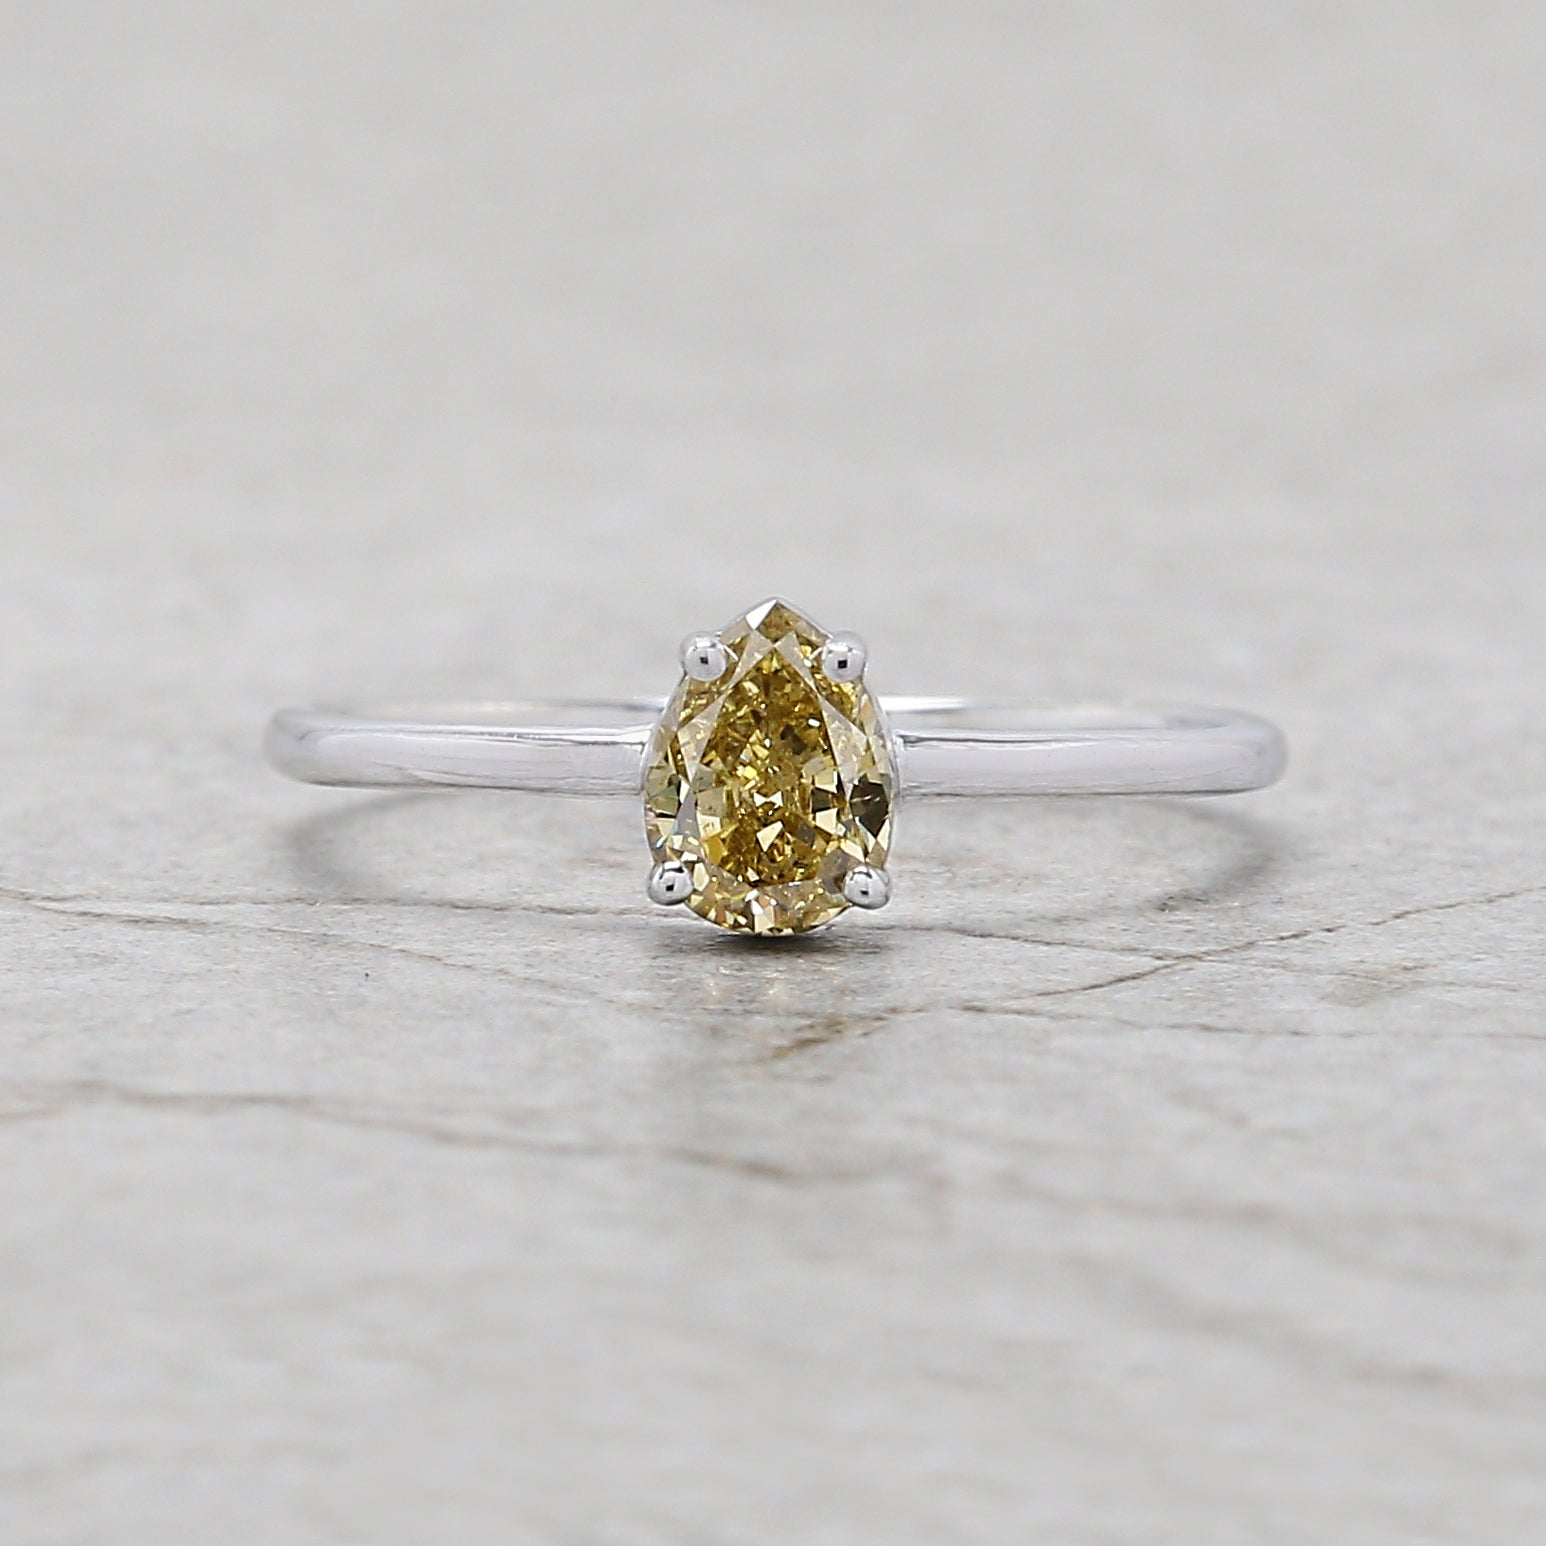 Pear Yellow Color Diamond Ring Engagement Wedding Gift Ring 14K Solid Rose White Yellow Gold Ring 0.53 CT KDN6985